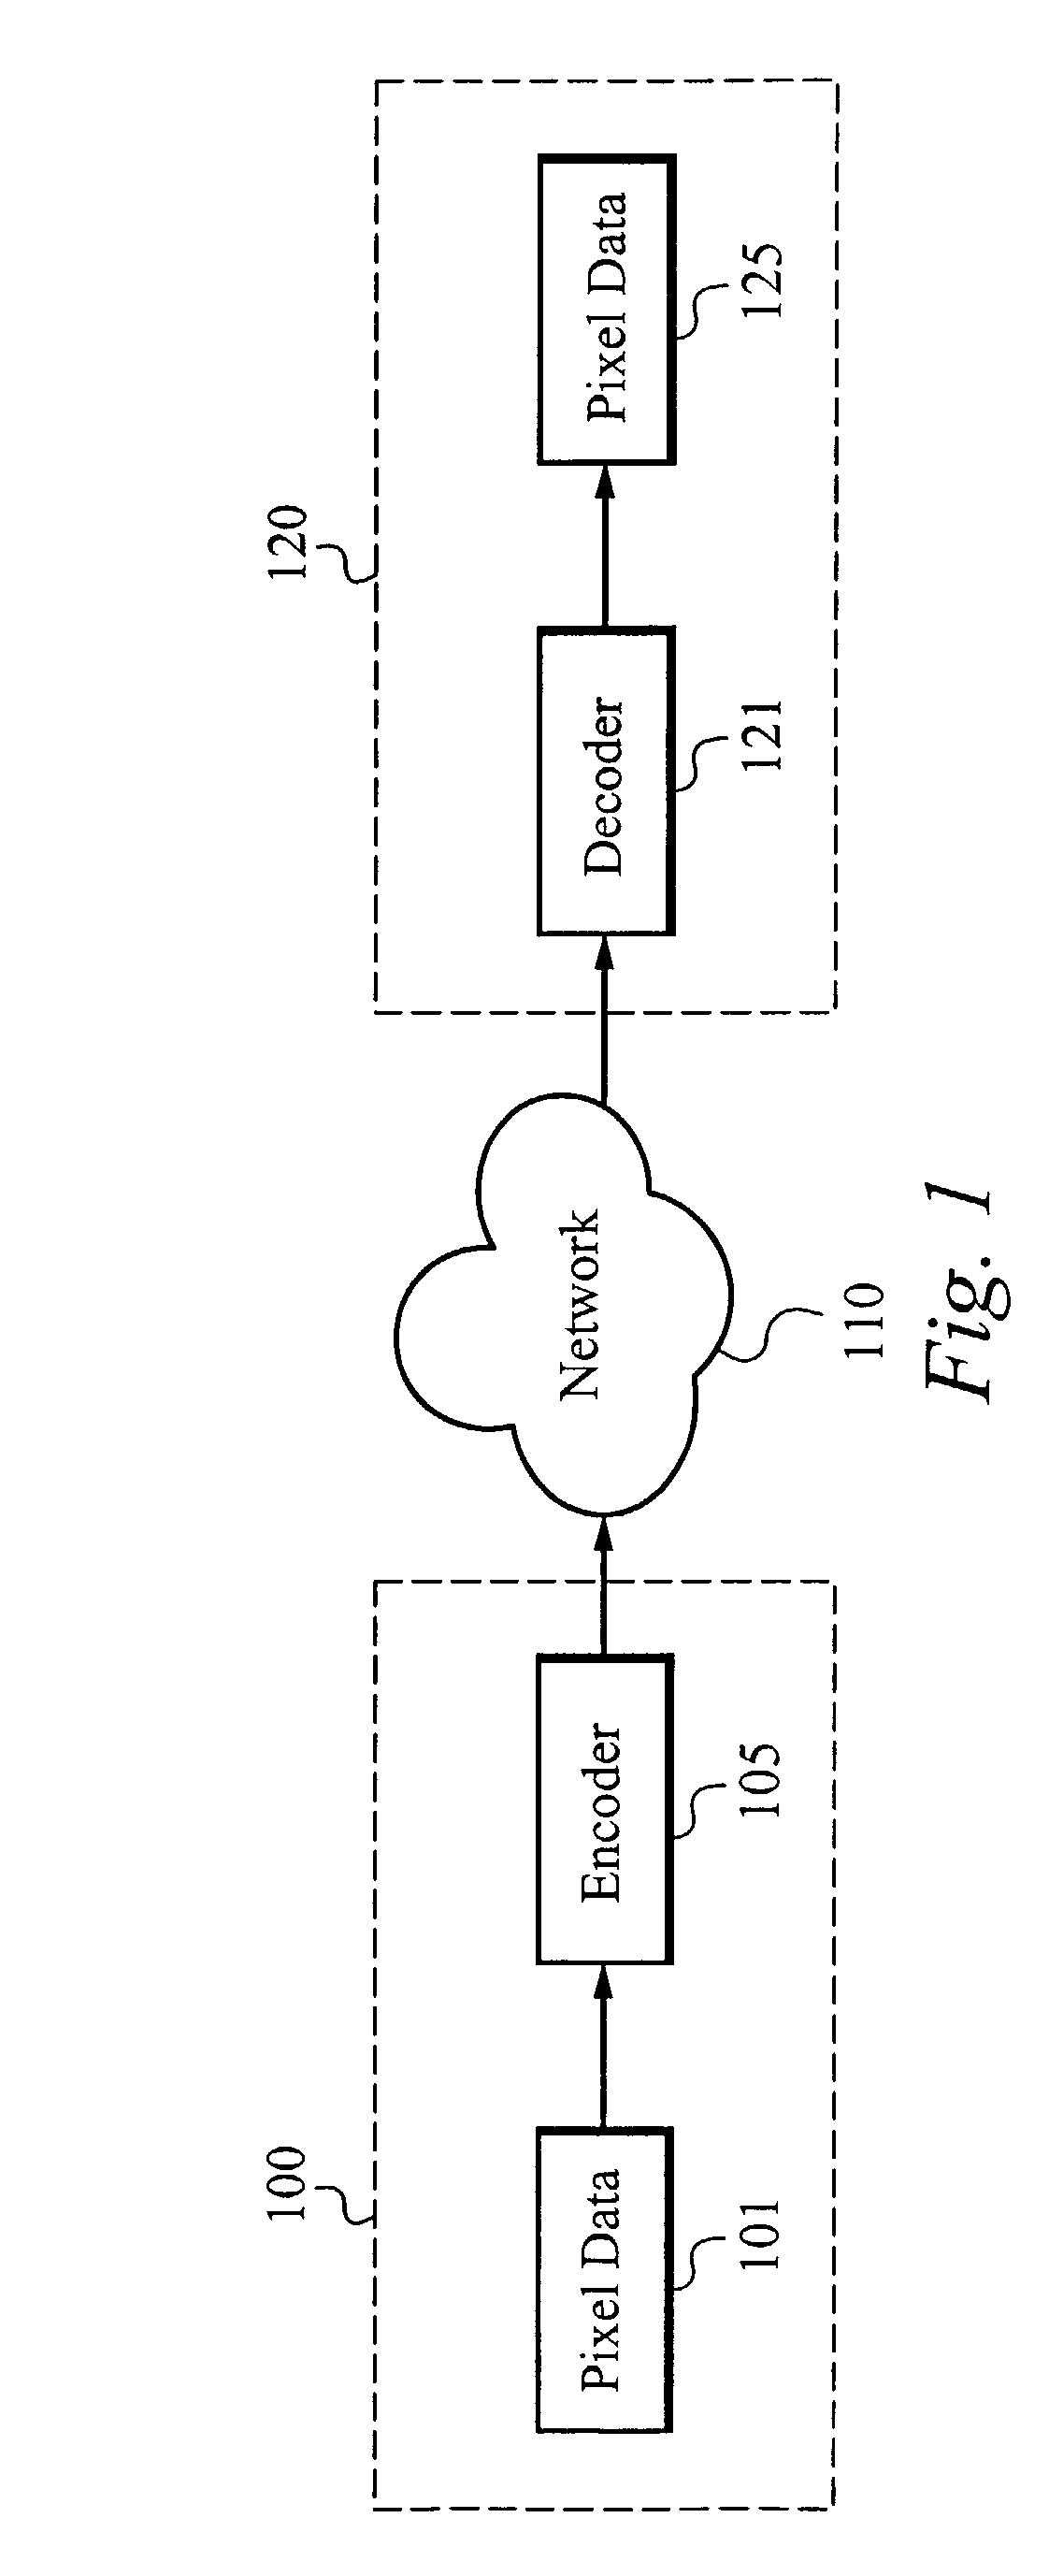 Apparatus and method of parallel processing an MPEG-4 data stream